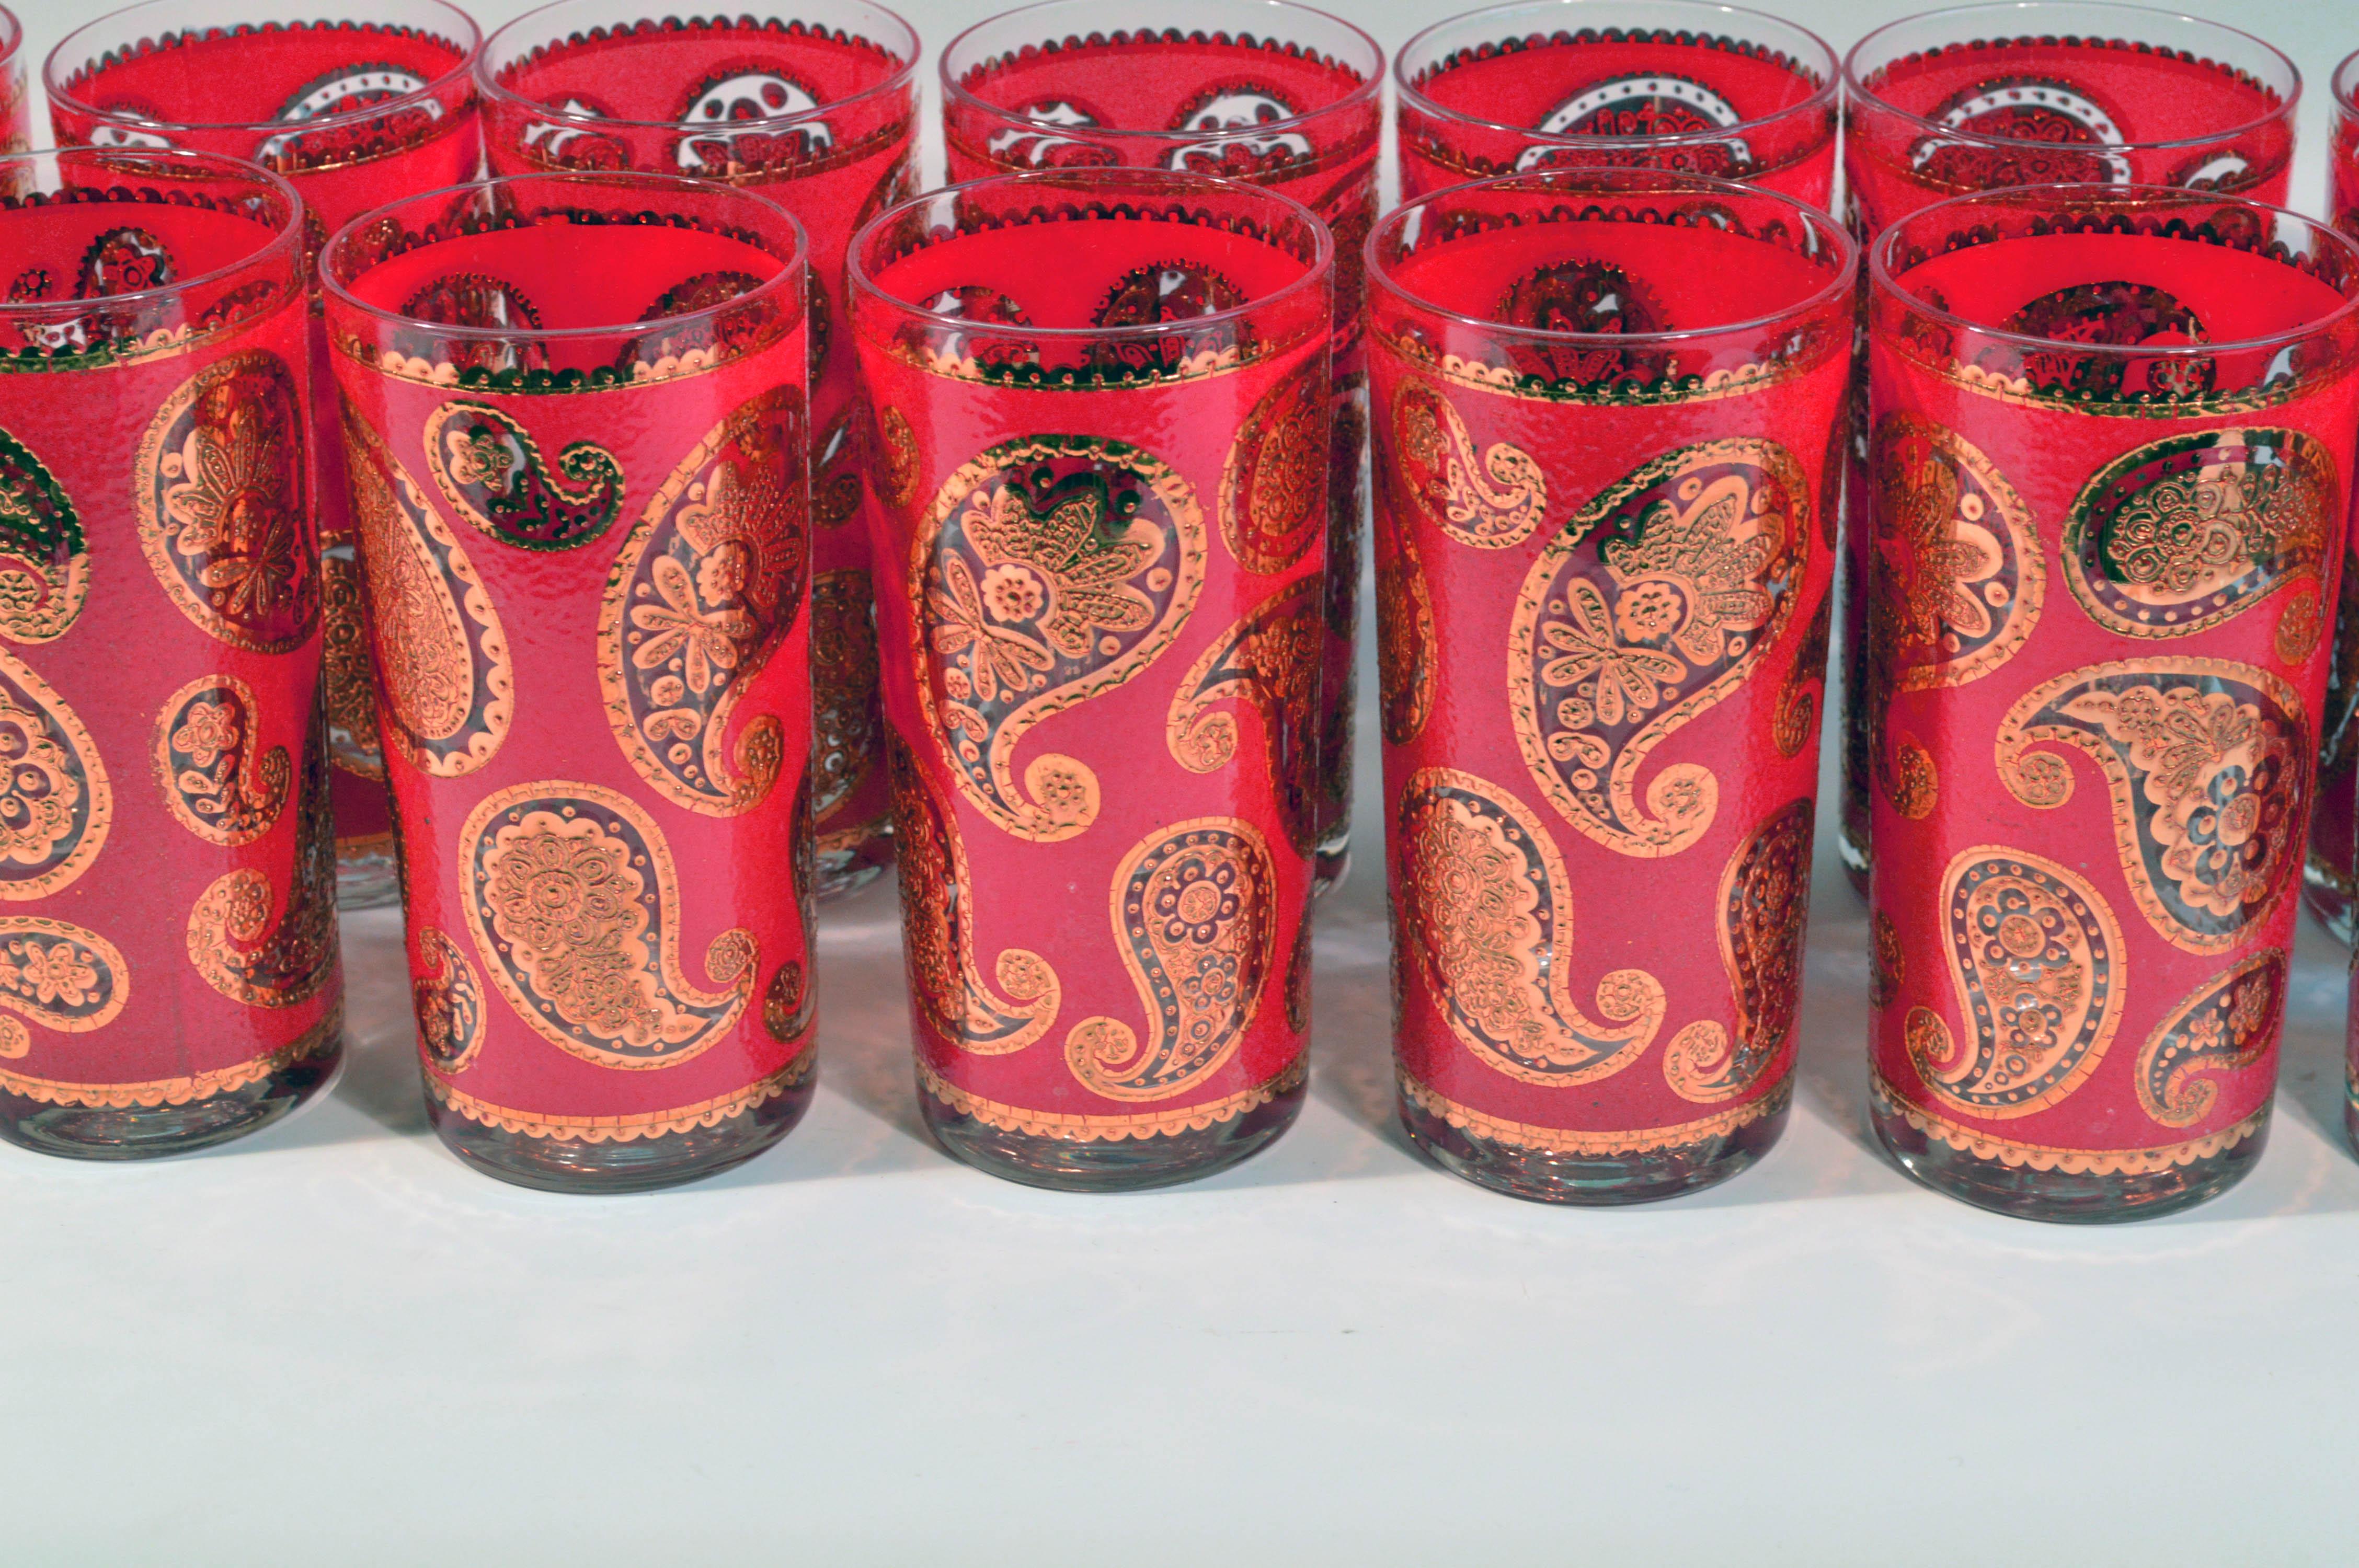 Culver set of Hollywood Regency red and gold paisley highball glasses, 
Set of sixteen. 
1960s.

Fabulous Culver glass highball tall tumbler glass. This is a 12 fl. oz glass. It is rare to find so many pieces together. The pattern has a tomato